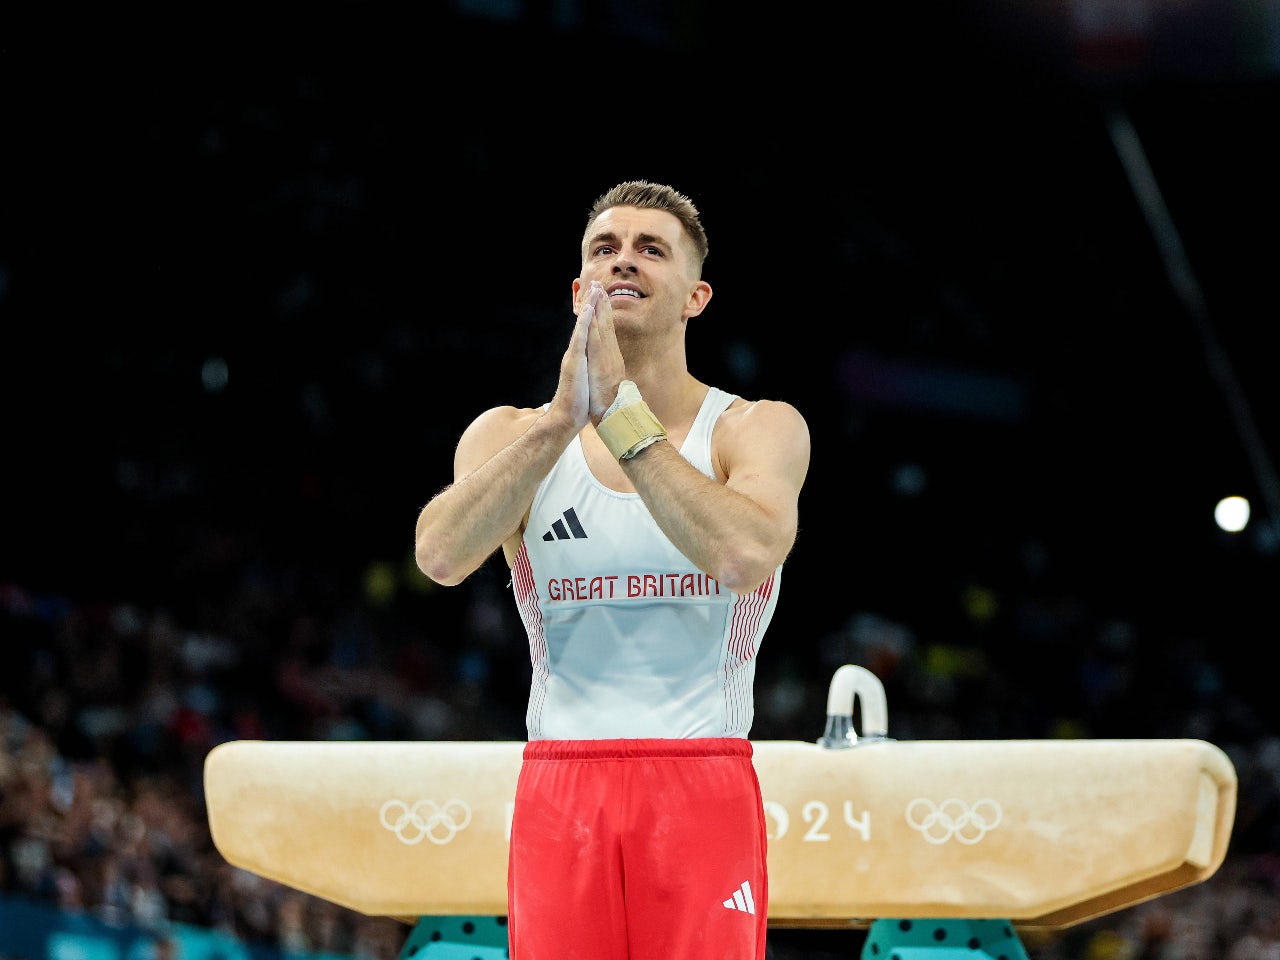 Max Whitlock misses out on pommel horse medal in Olympics swansong